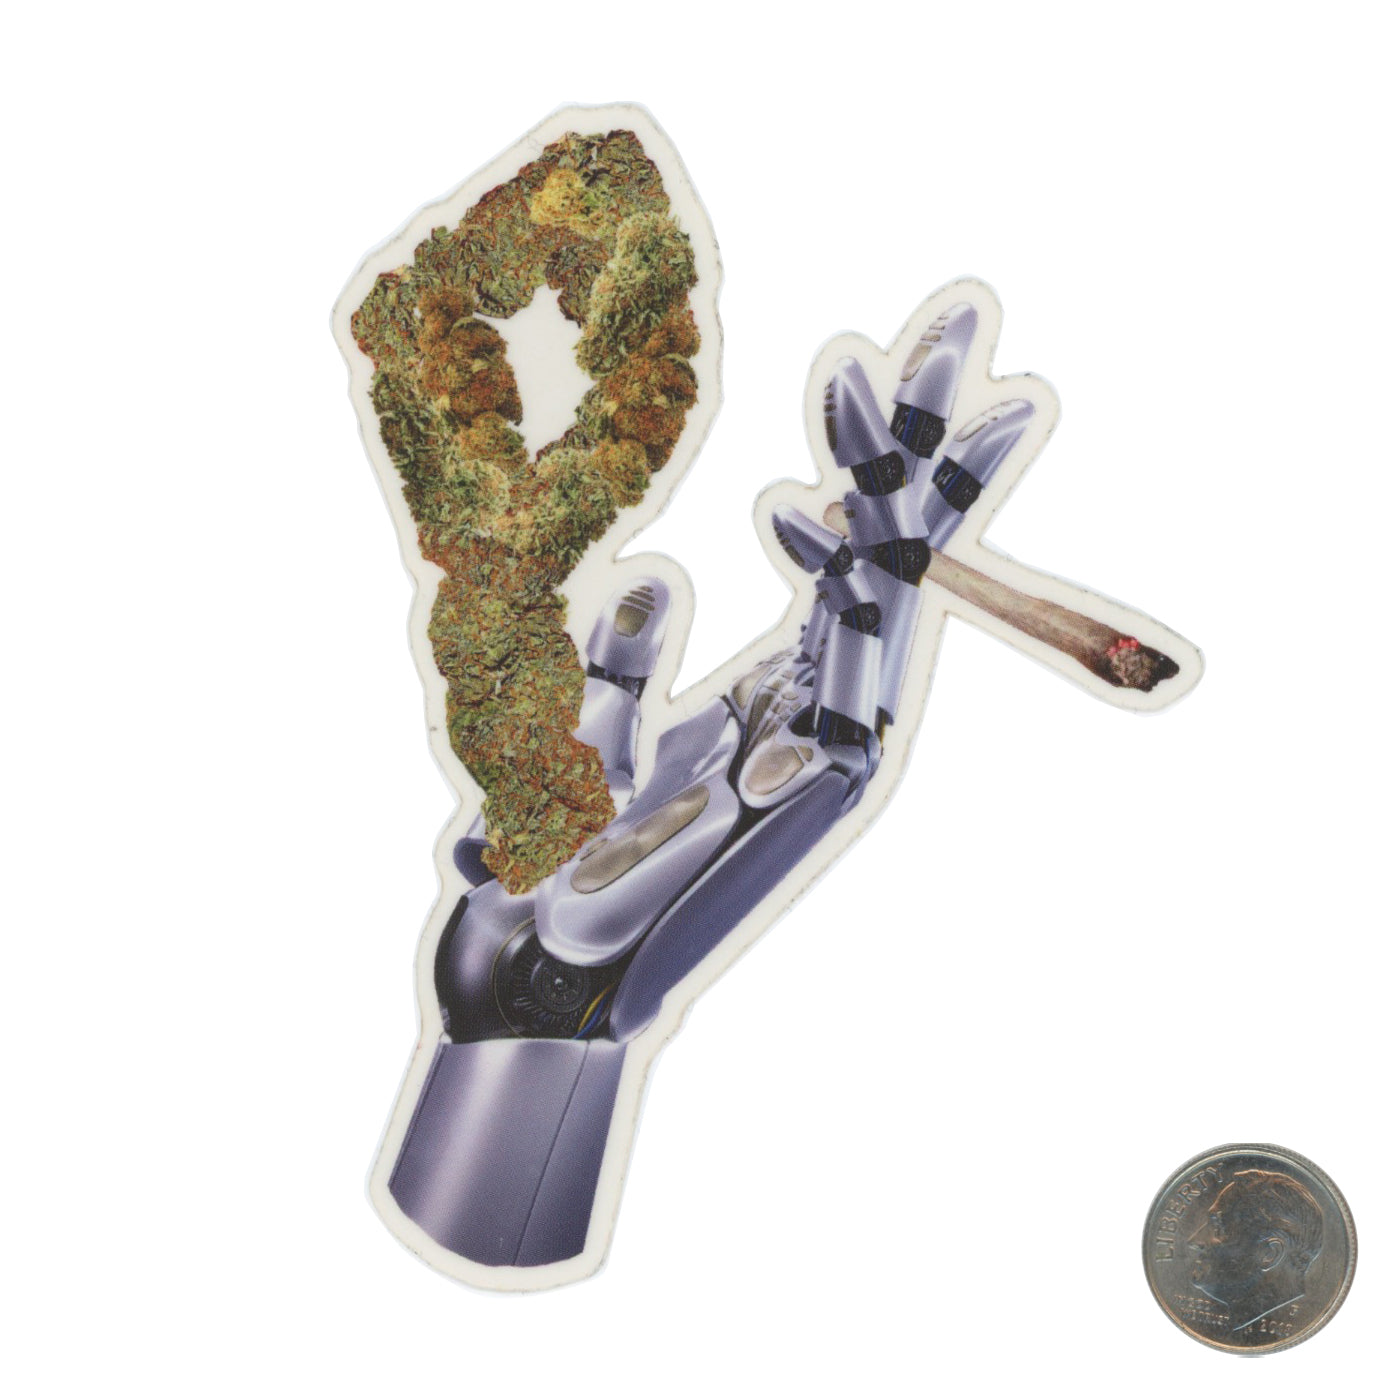 Bareone Cannabis in Prosthetic Hand Sticker with dime